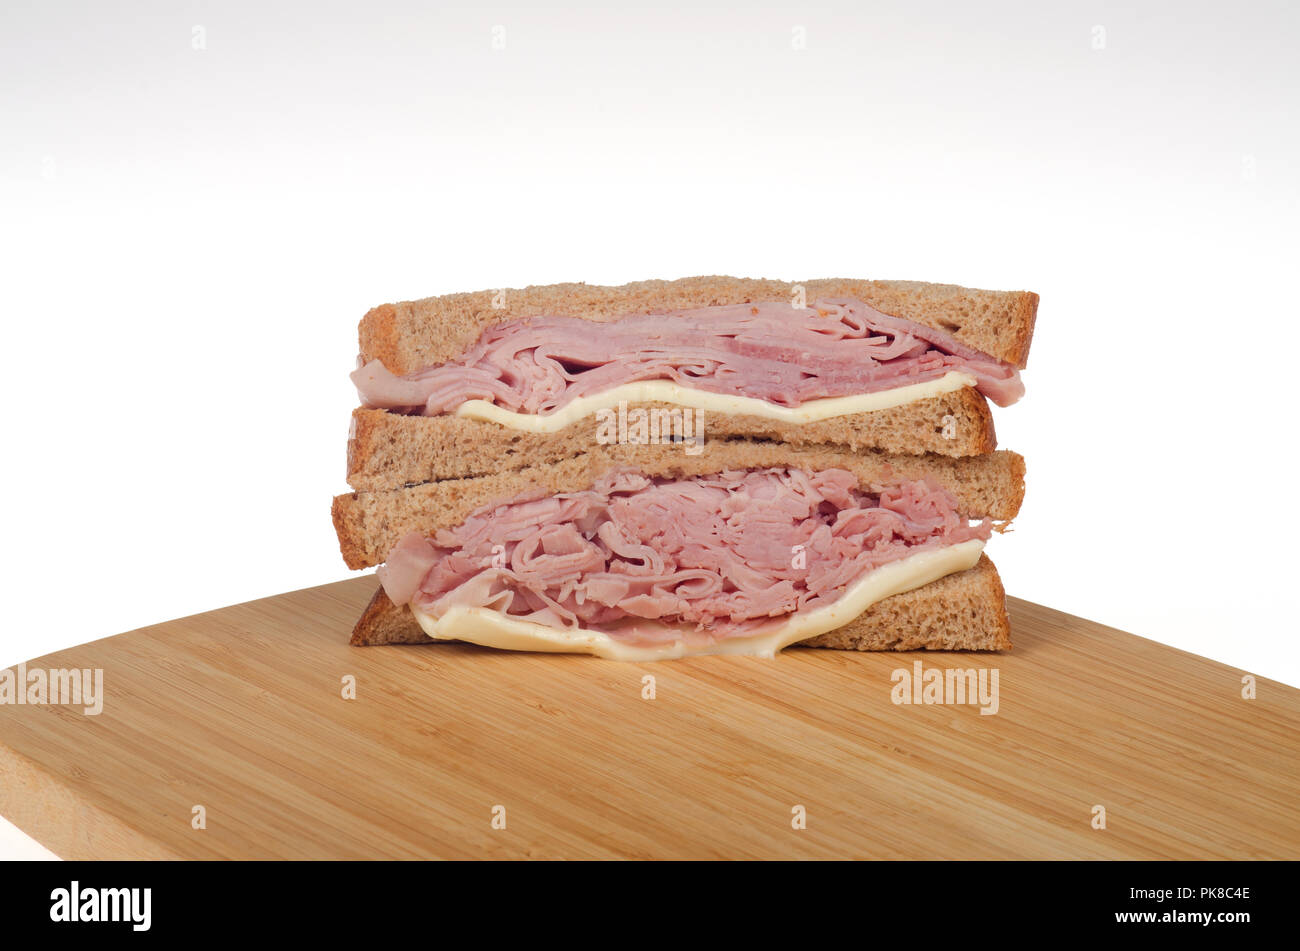 Ham and Cheese sandwich on whole wheat bread on a wood cutting board Stock Photo